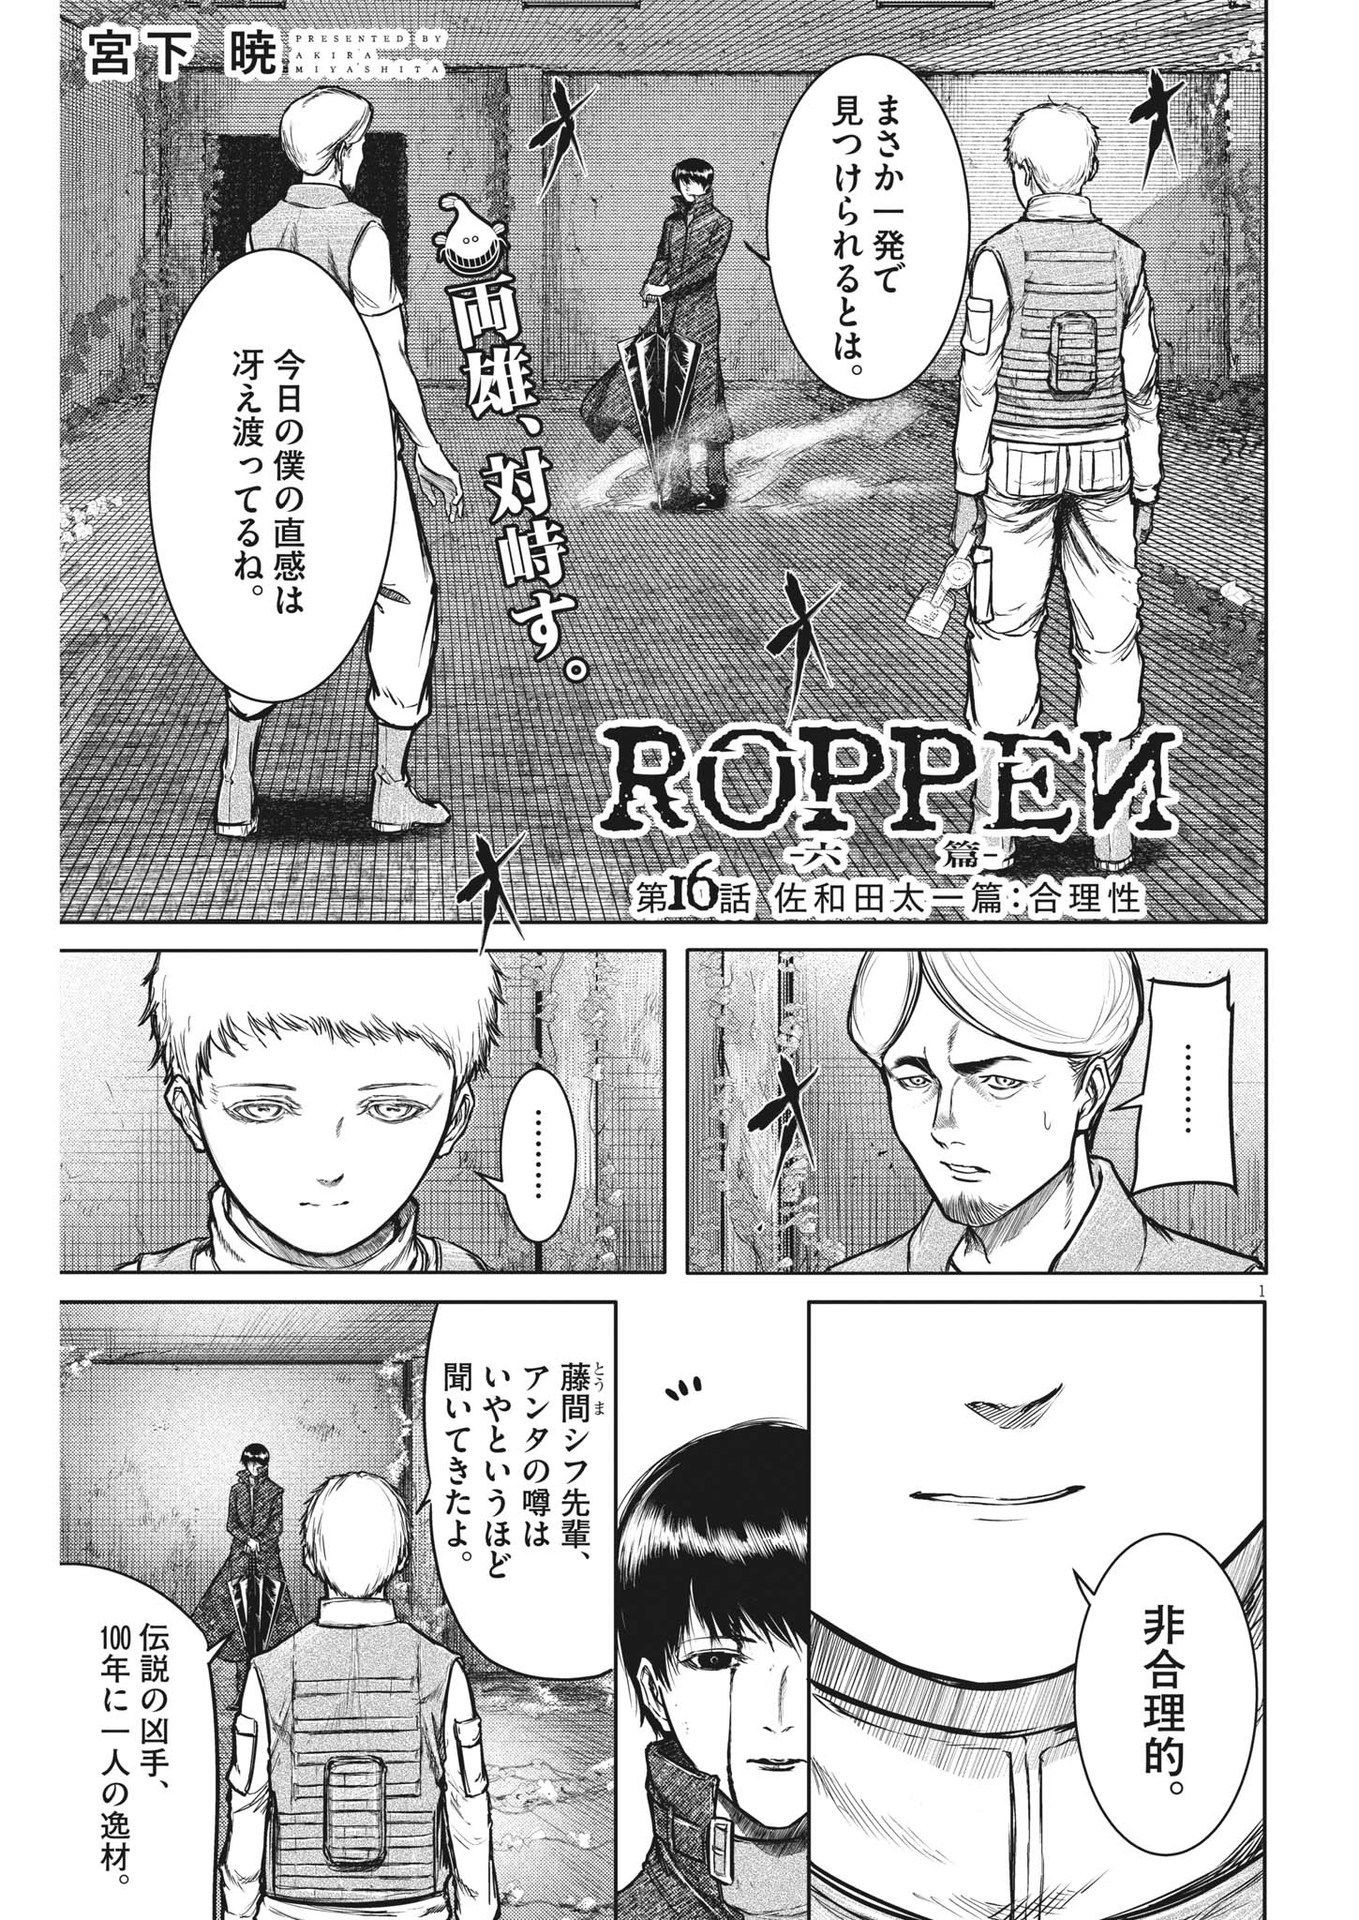 Roppen - Chapter 16 - Page 1